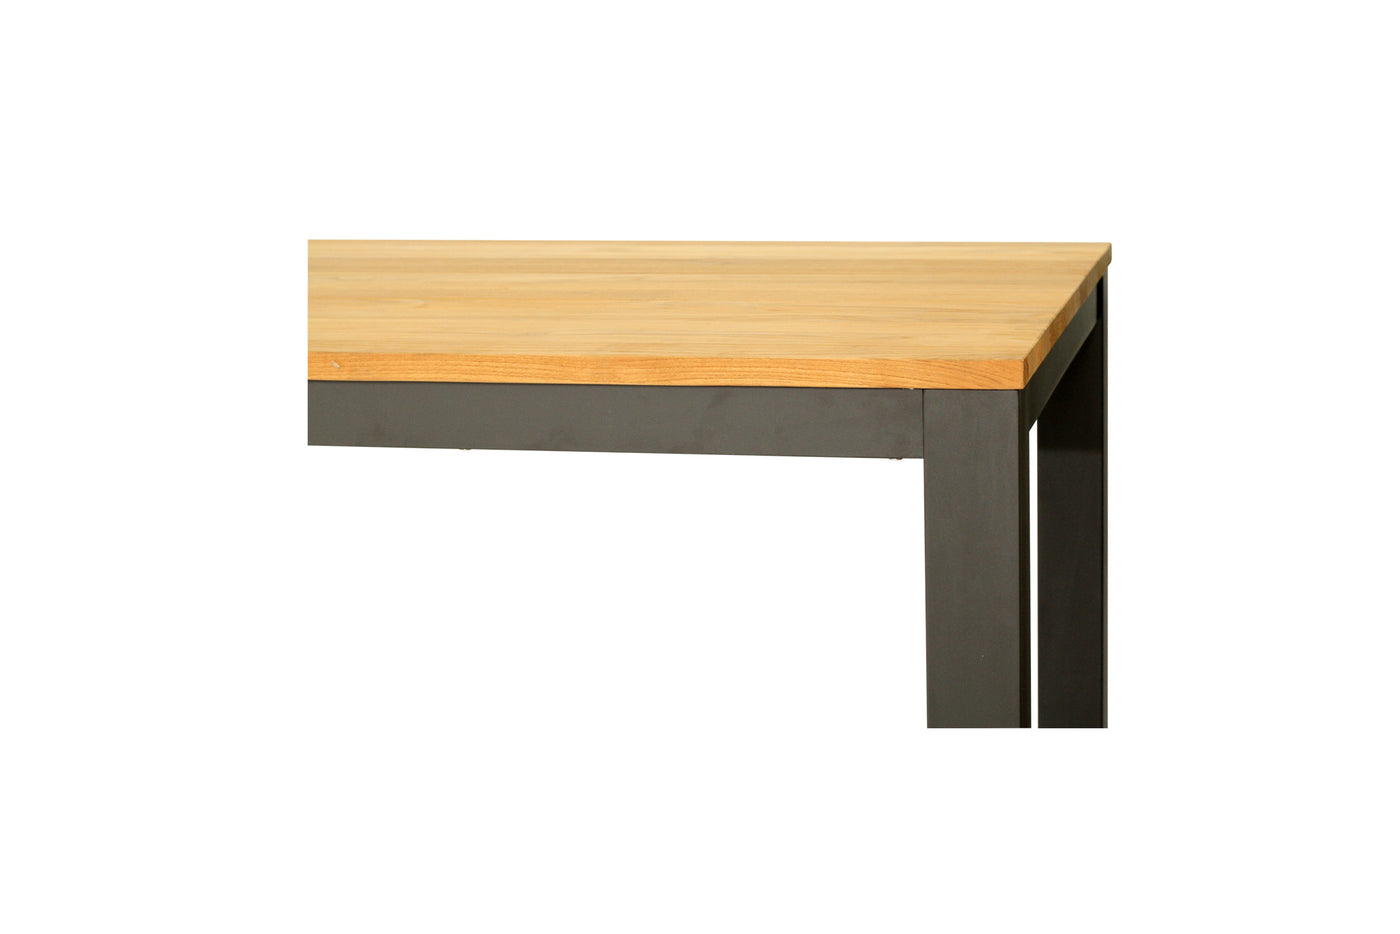 Carmel Outdoor Extension Table 3.1m - Asteroid Black (Charcoal) Powder Coated Legs